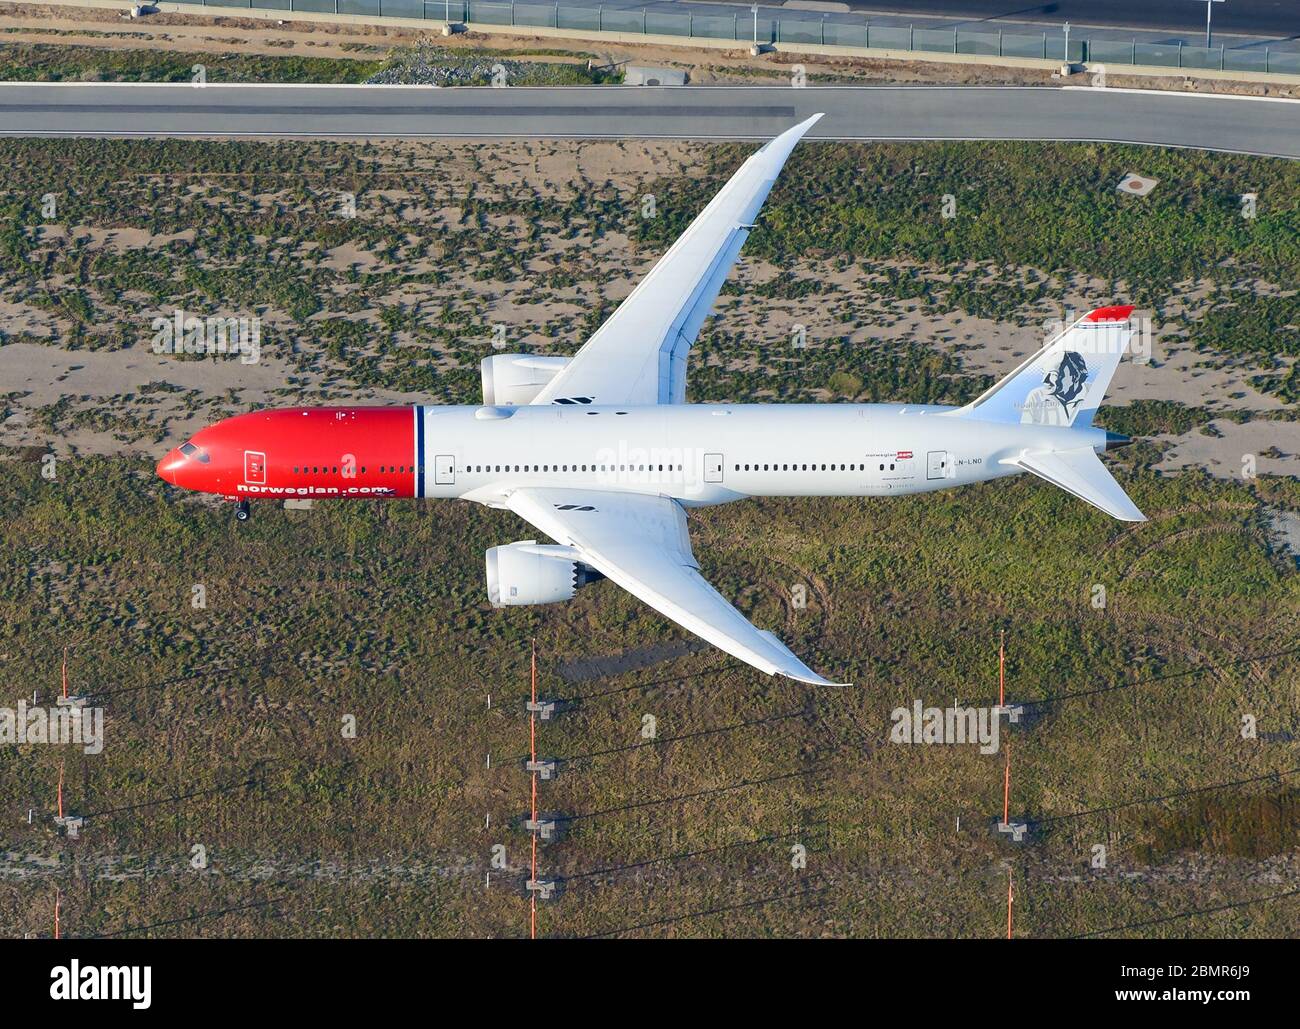 Norwegian Air Boeing 787 Dreamliner on final approach Los Angeles International Airport, USA. Aerial view of 787-9 aircraft registered as LN-LNO. Stock Photo